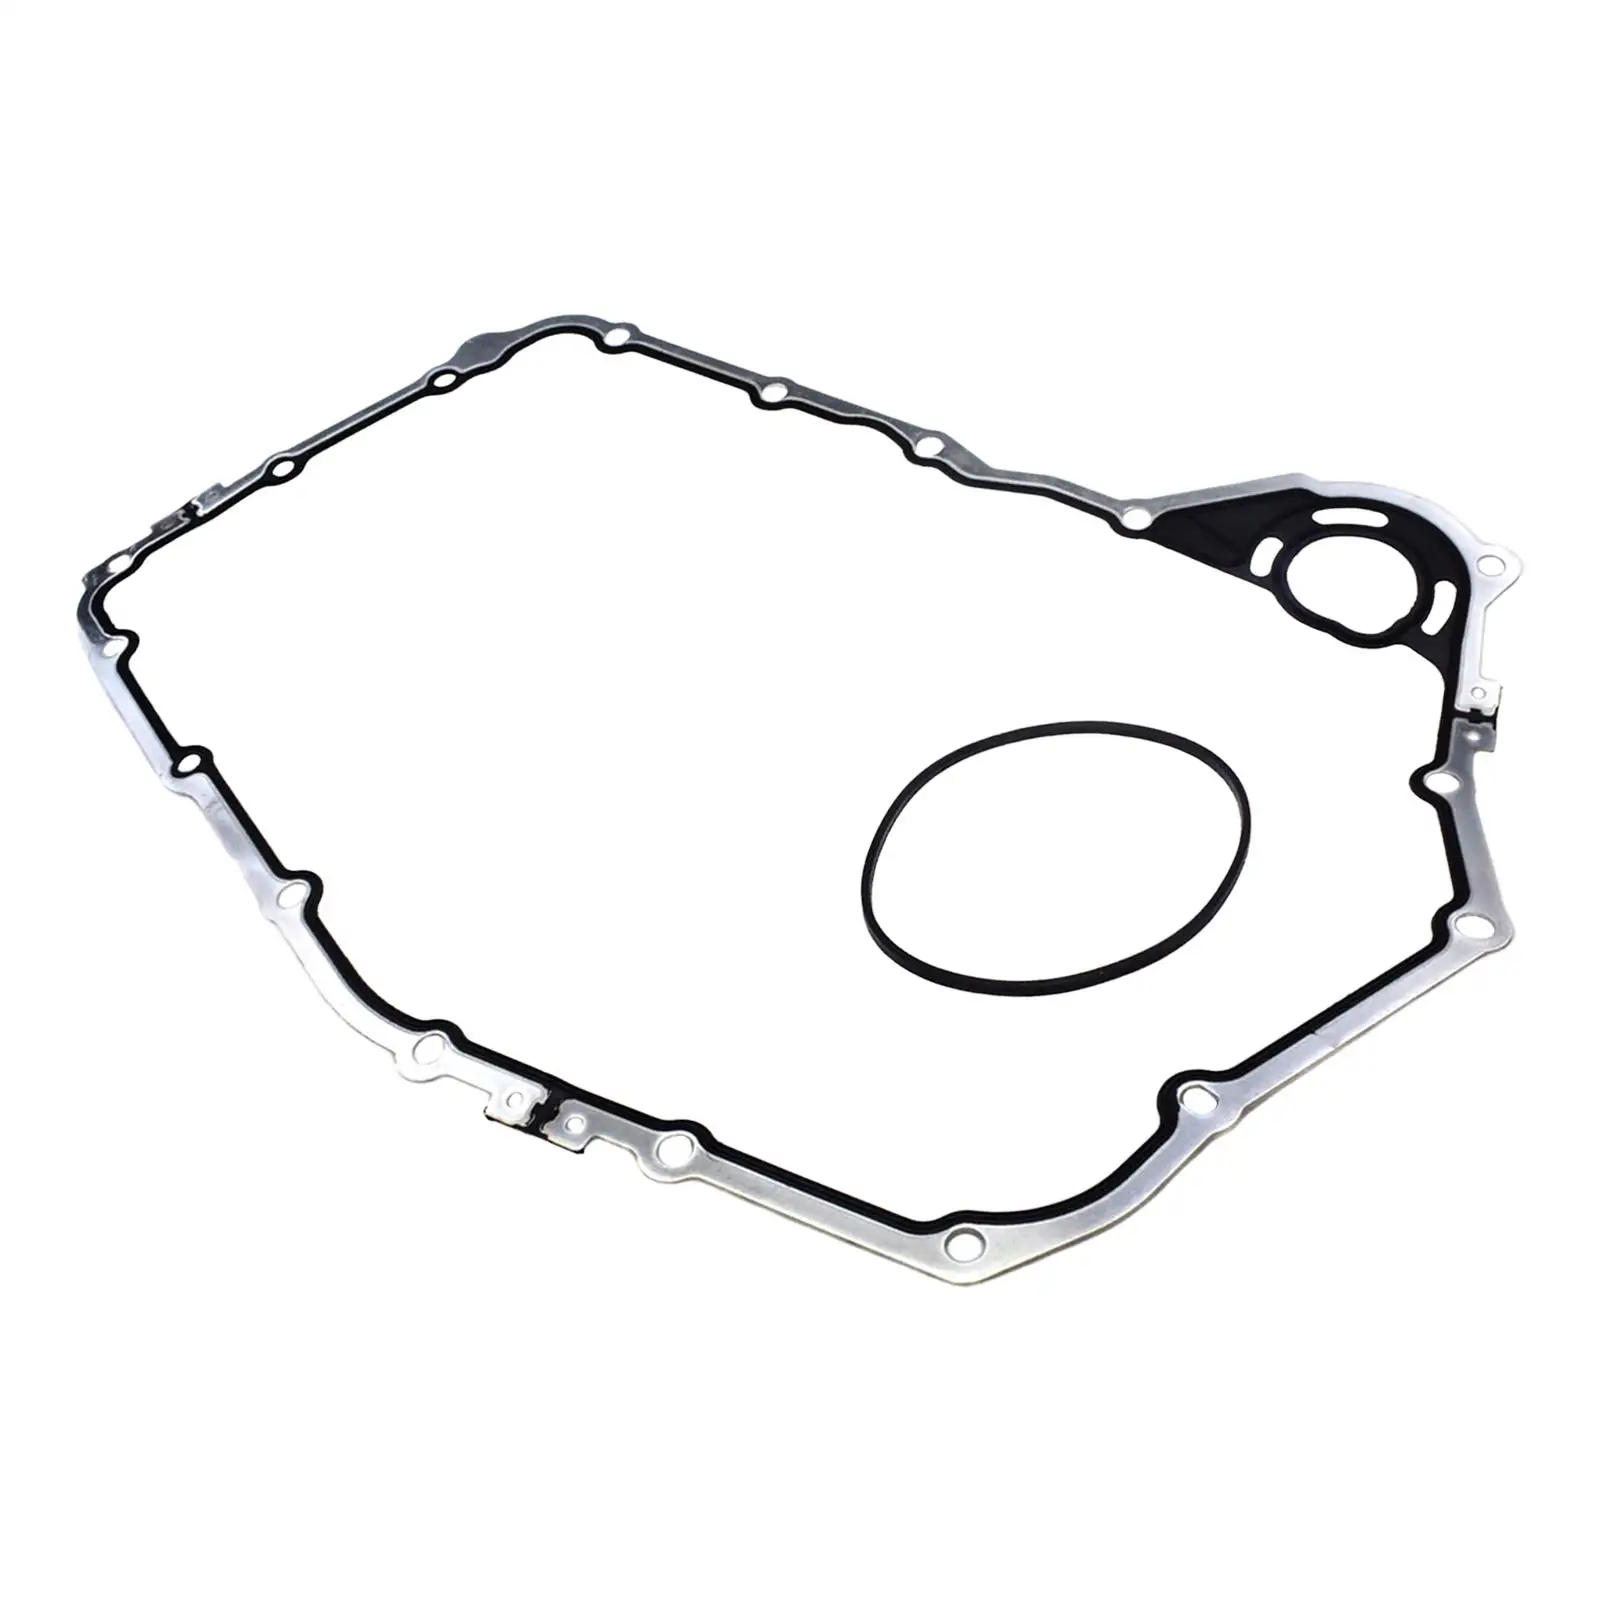 4T65E Engine Automatic Transmission Case Gasket Side Cover Seal Kit, 24206959for Buick 3.0 2.5/S80 ,Vehicles Replacement Rubber